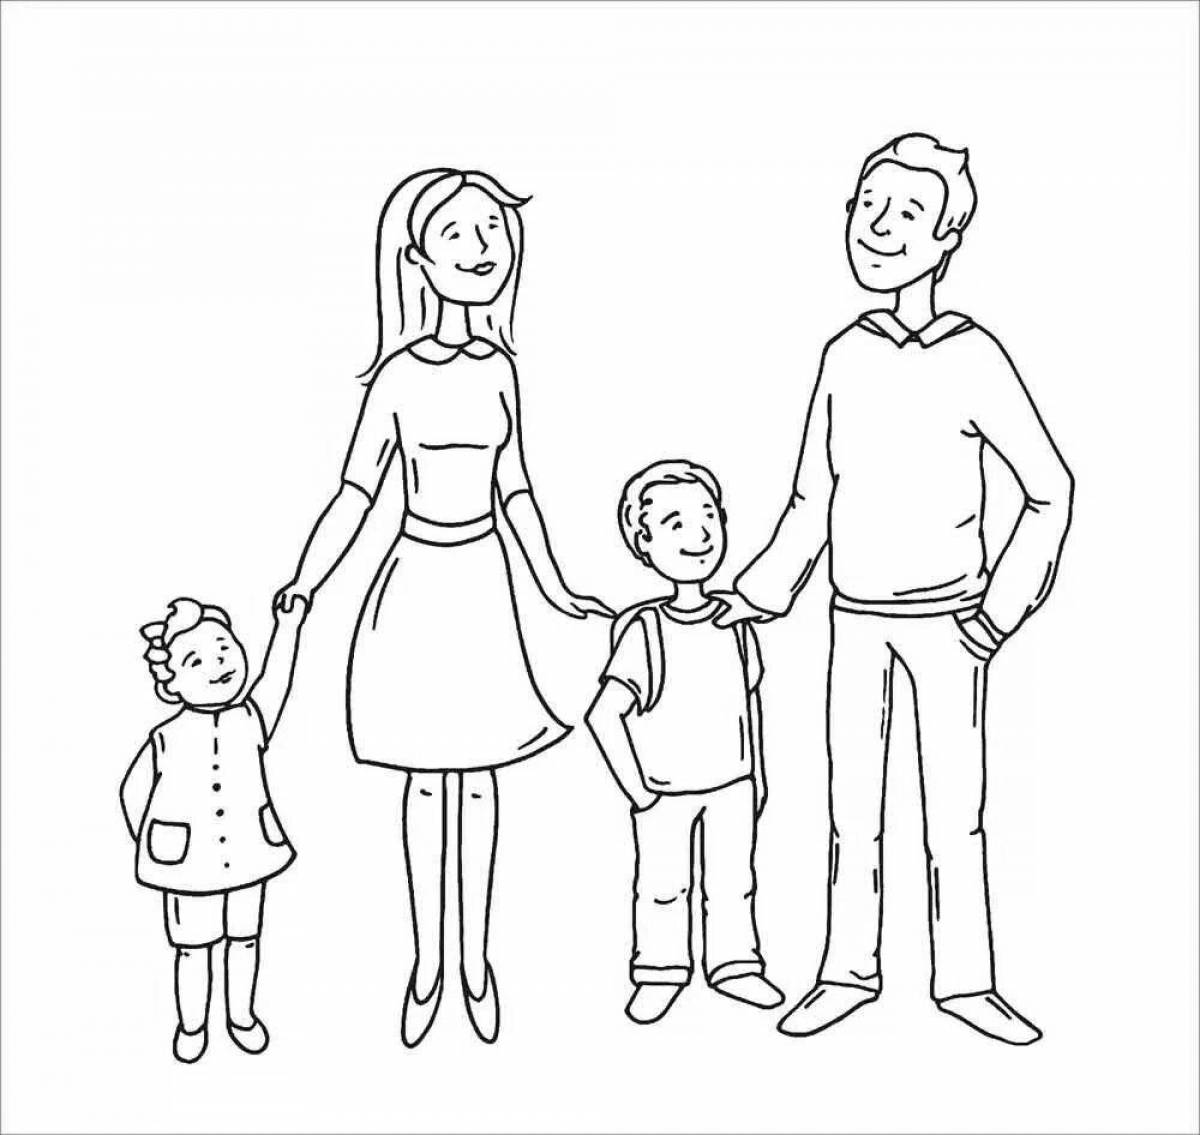 Great mom and dad coloring book for kids